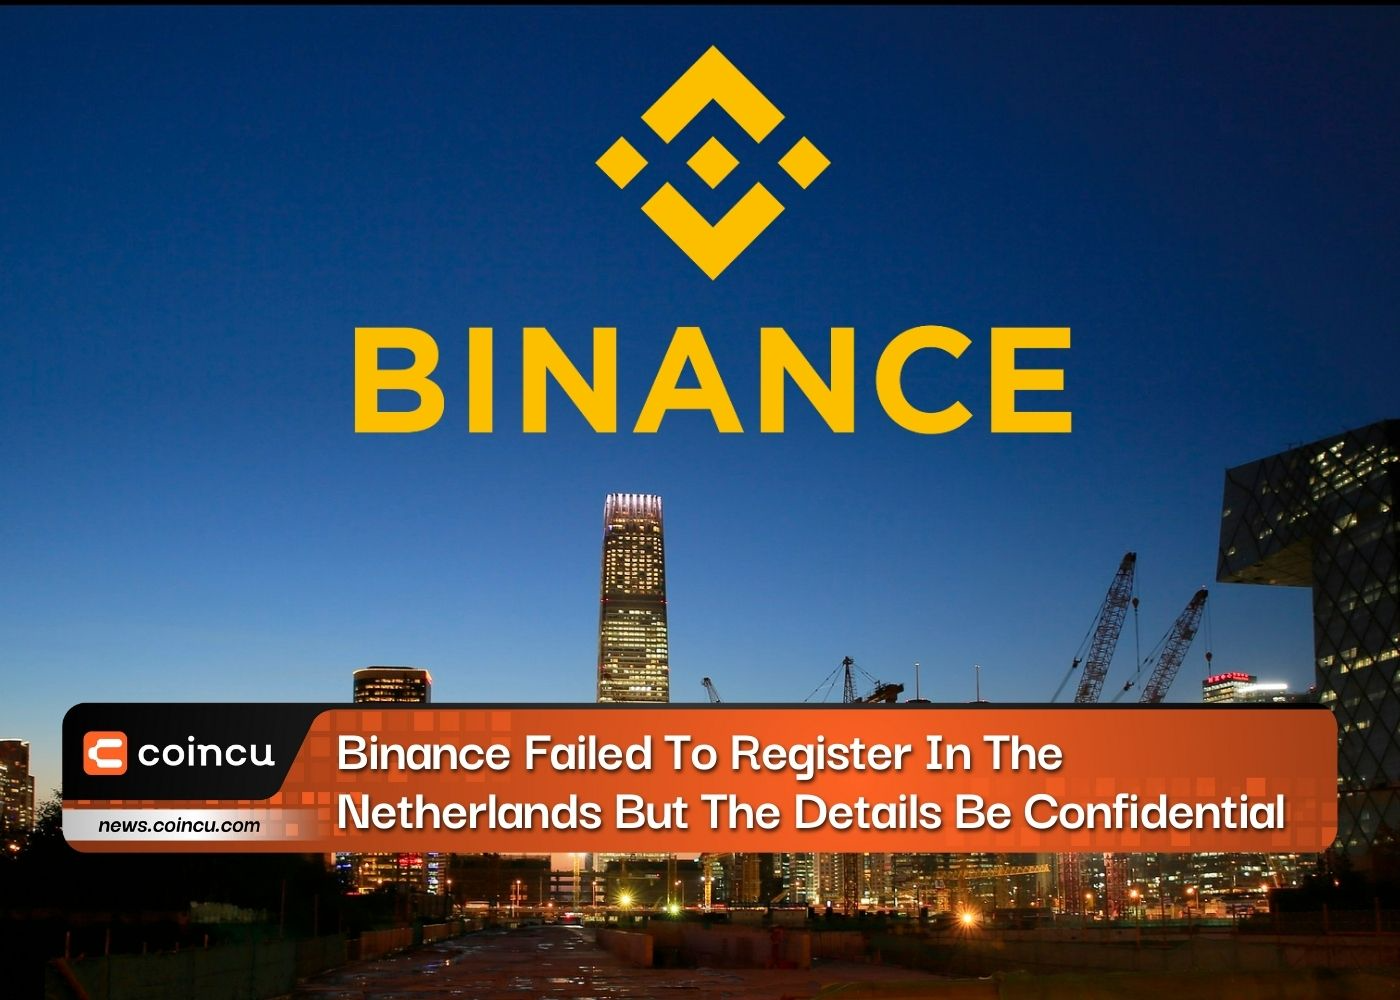 Binance Failed To Register In The Netherlands But The Details Be Confidential